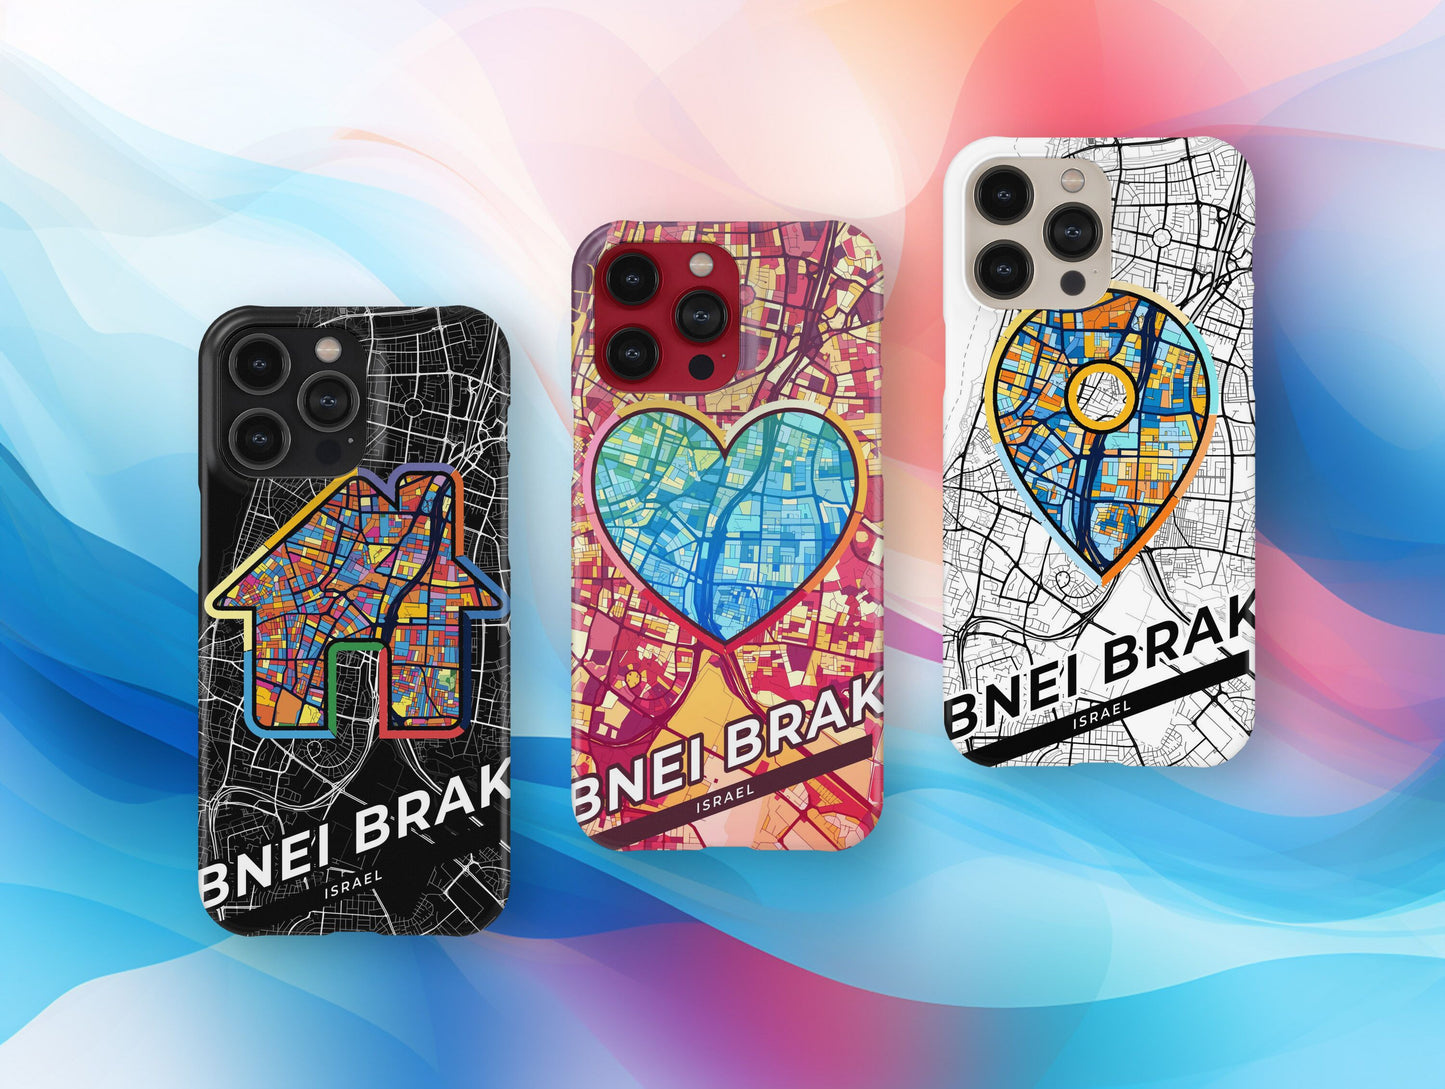 Bnei Brak Israel slim phone case with colorful icon. Birthday, wedding or housewarming gift. Couple match cases.